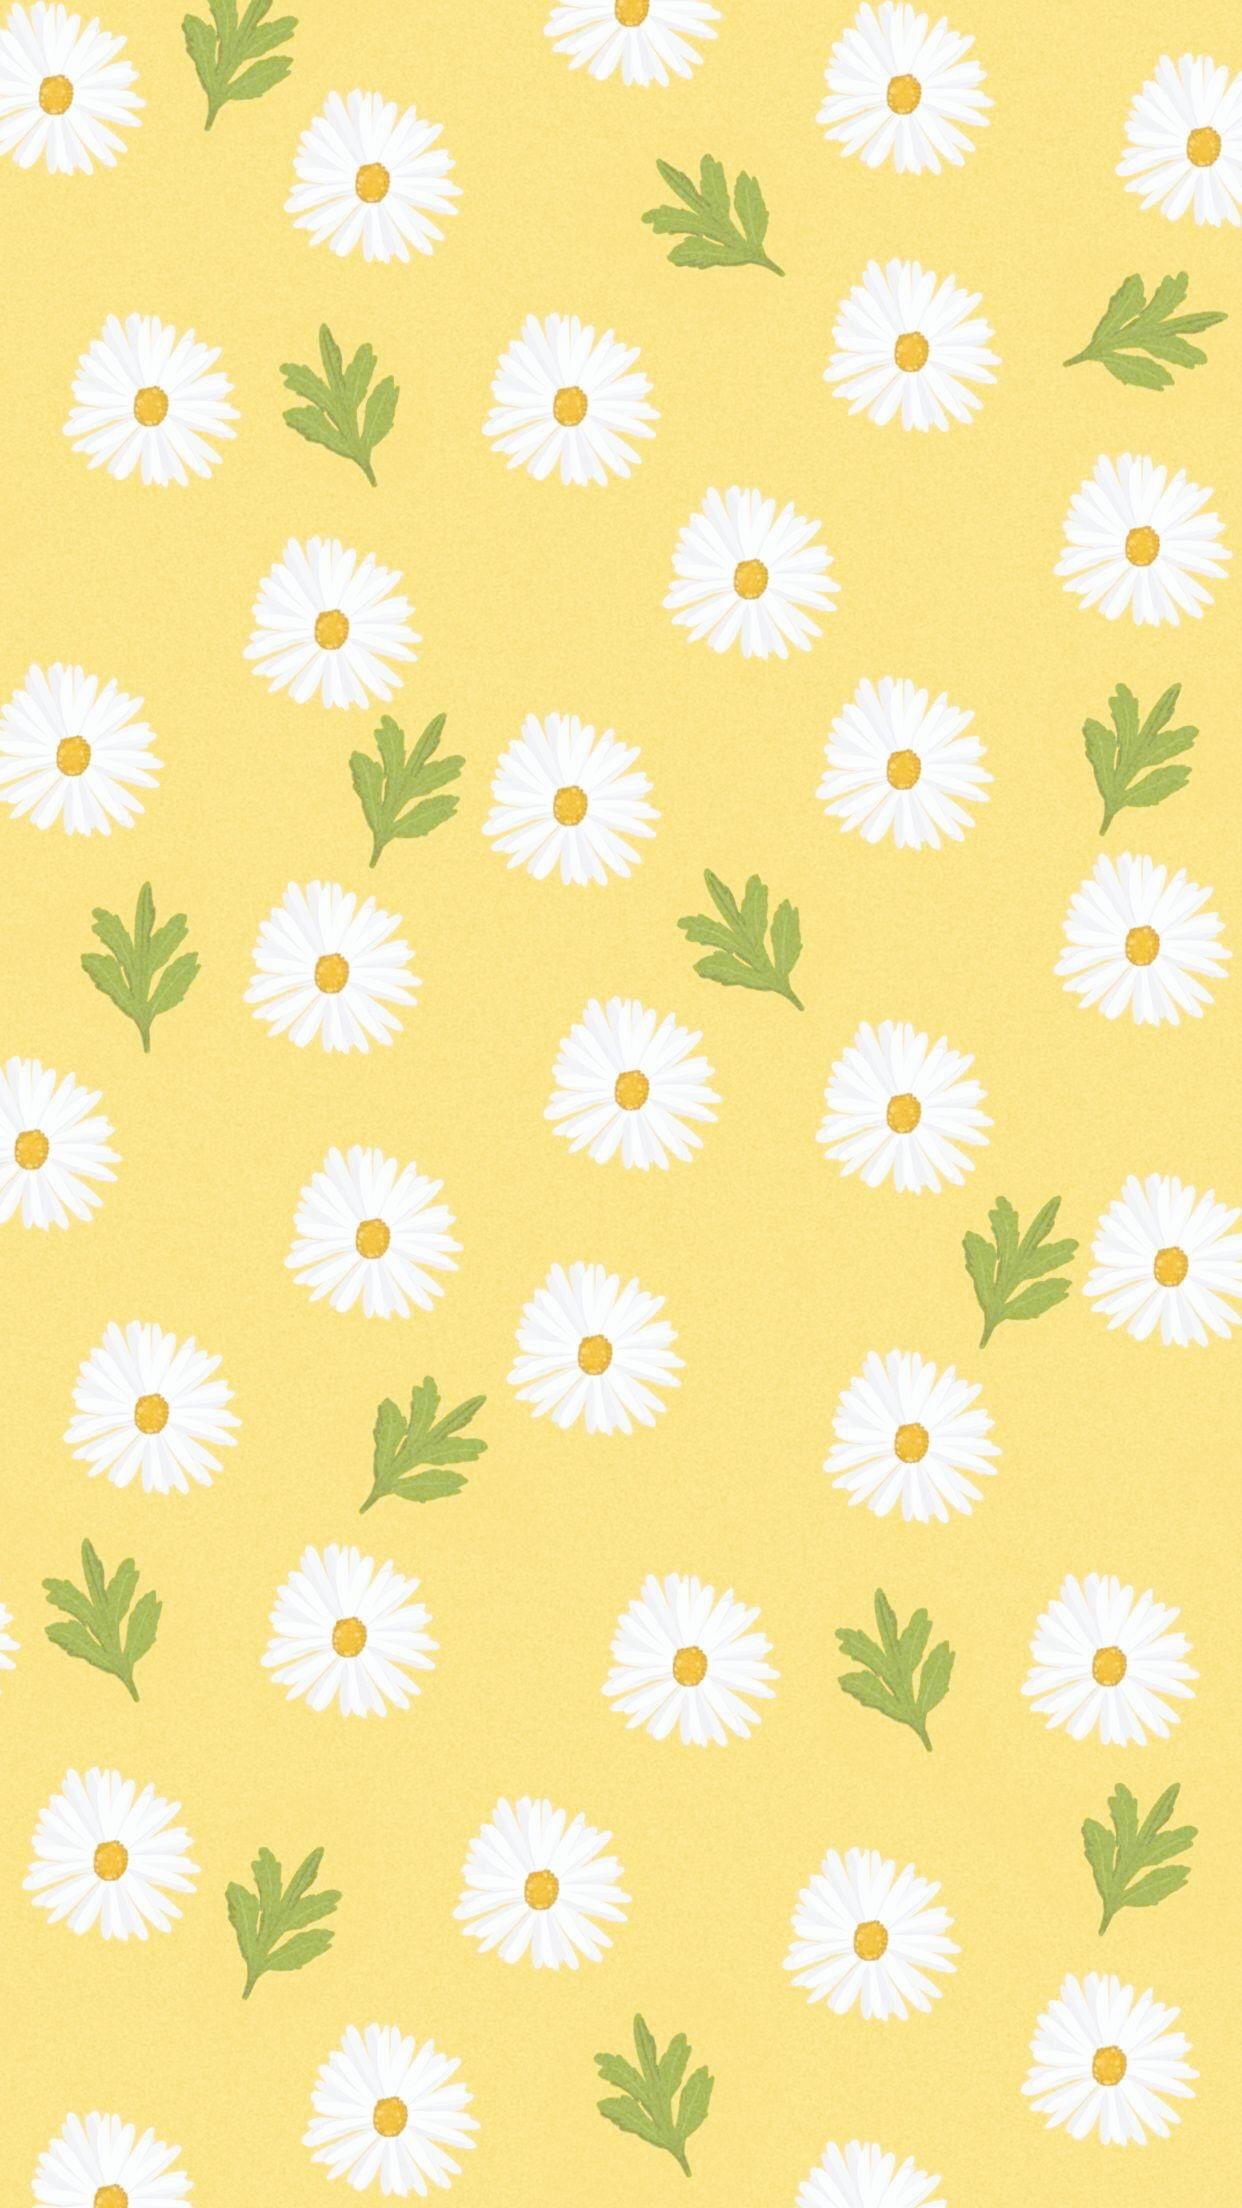 Yellow wallpaper with white daisies and green leaves. - Daisy